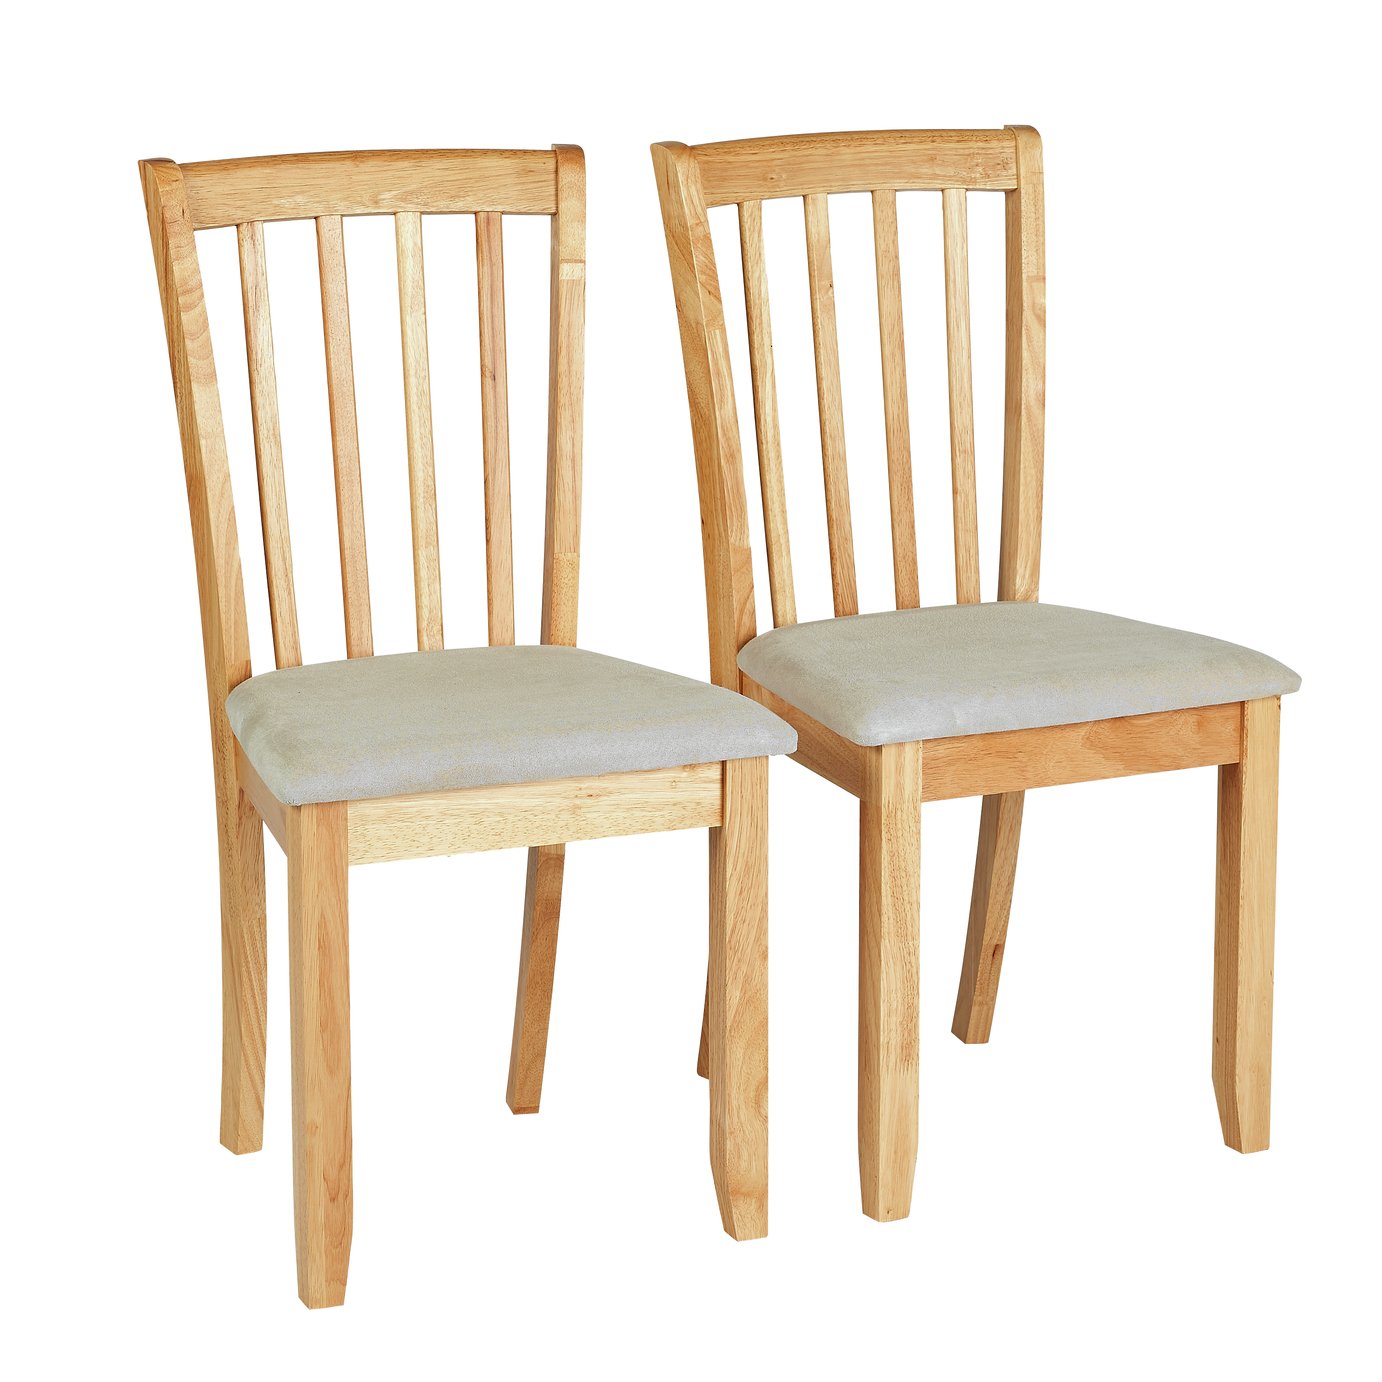 Argos Home Banbury Pair of Dining Chairs - Light Wood